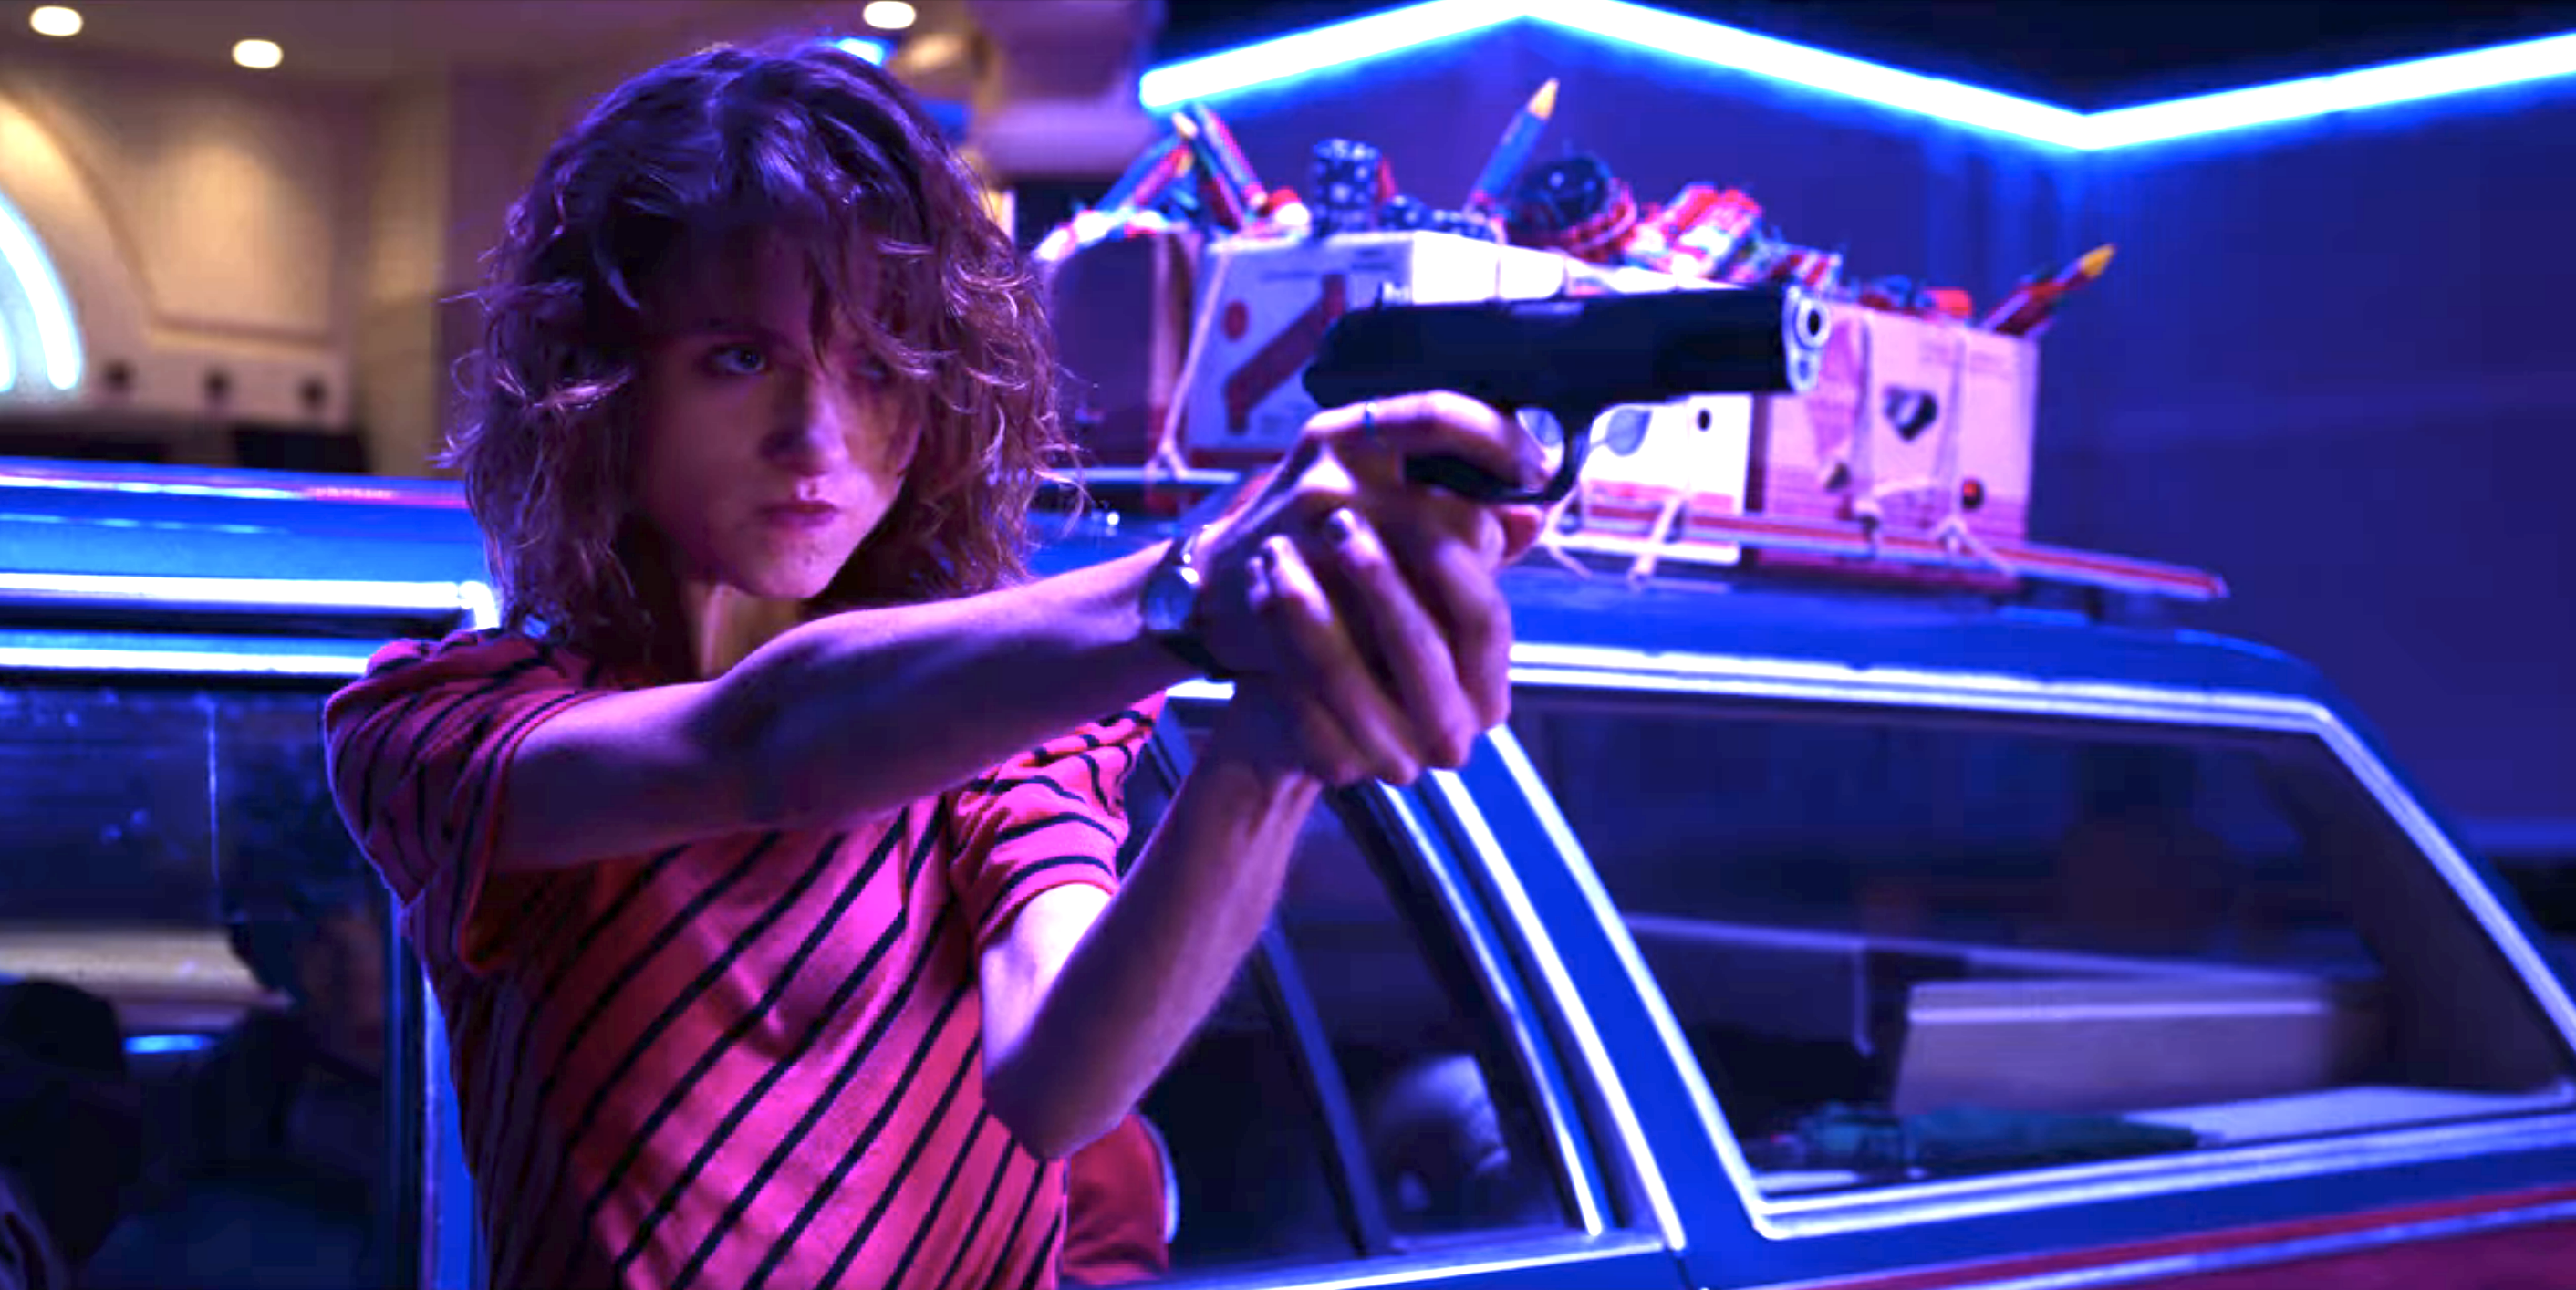 Nancy pointing a gun while leaning out the car window wearing a diagonally striped top